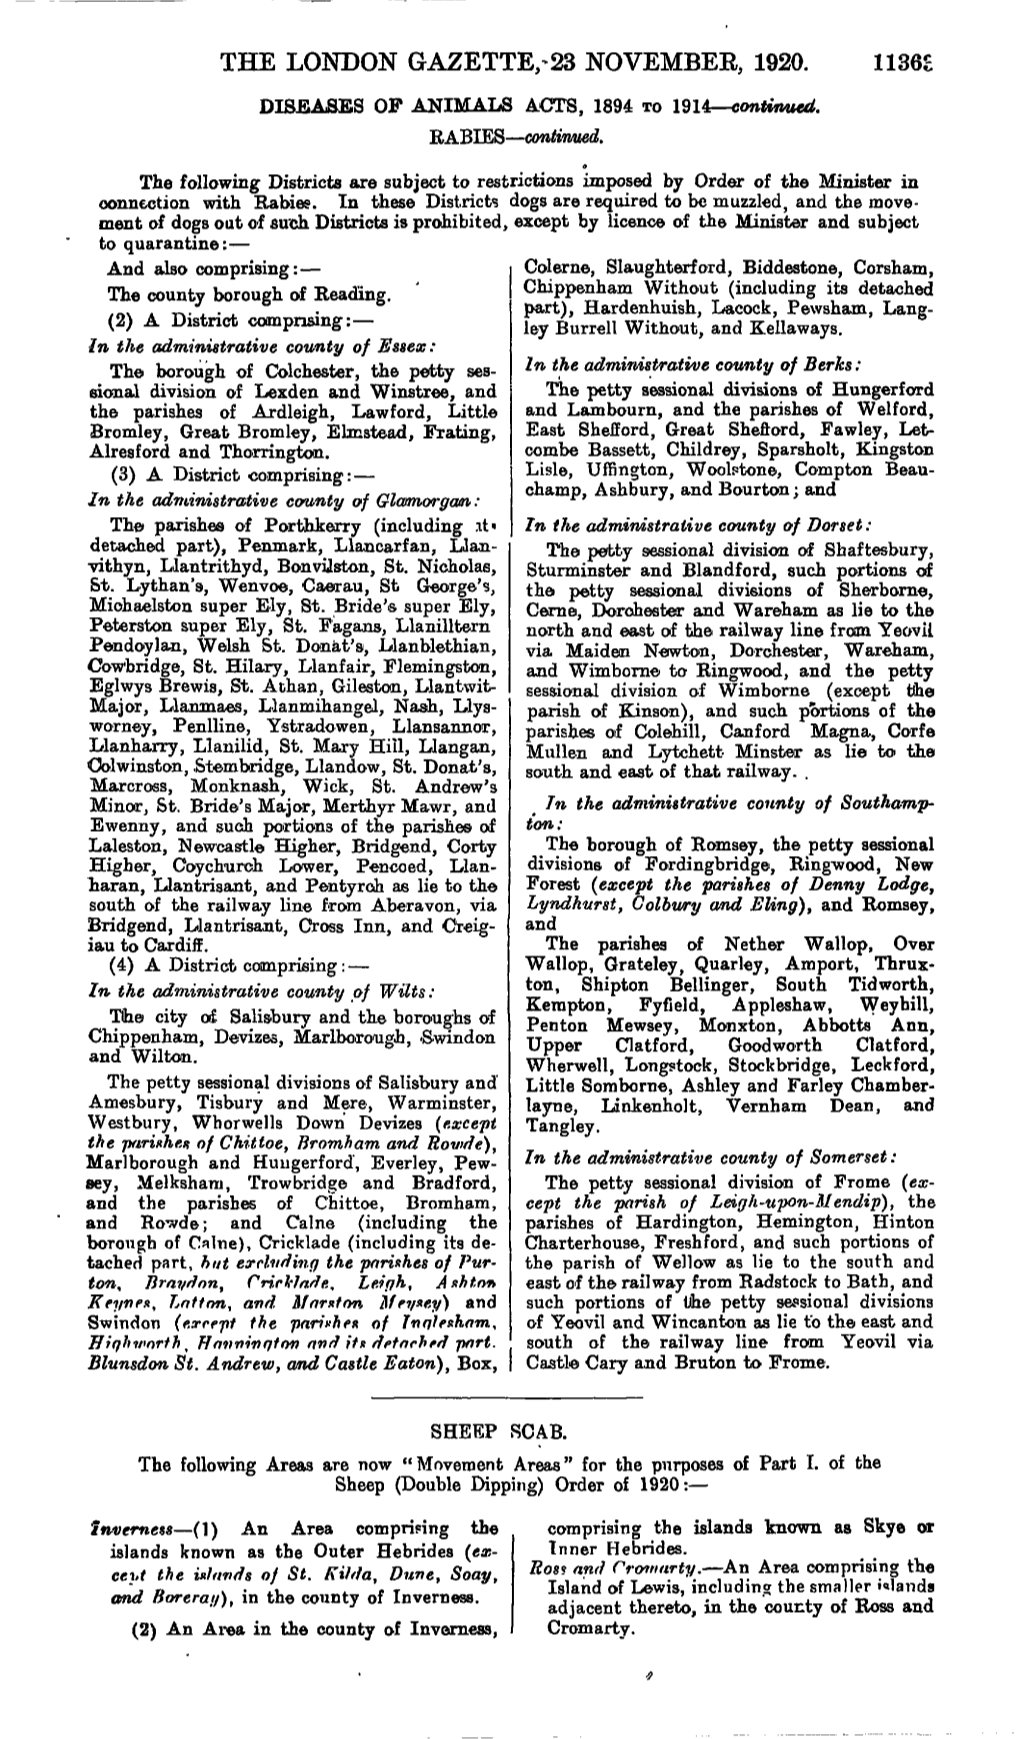 THE LONDON GAZETTED23 NOVEMBER, 1920. 1136S DISEASES of ANIMALS ACTS, 1894 to 1914—Continued